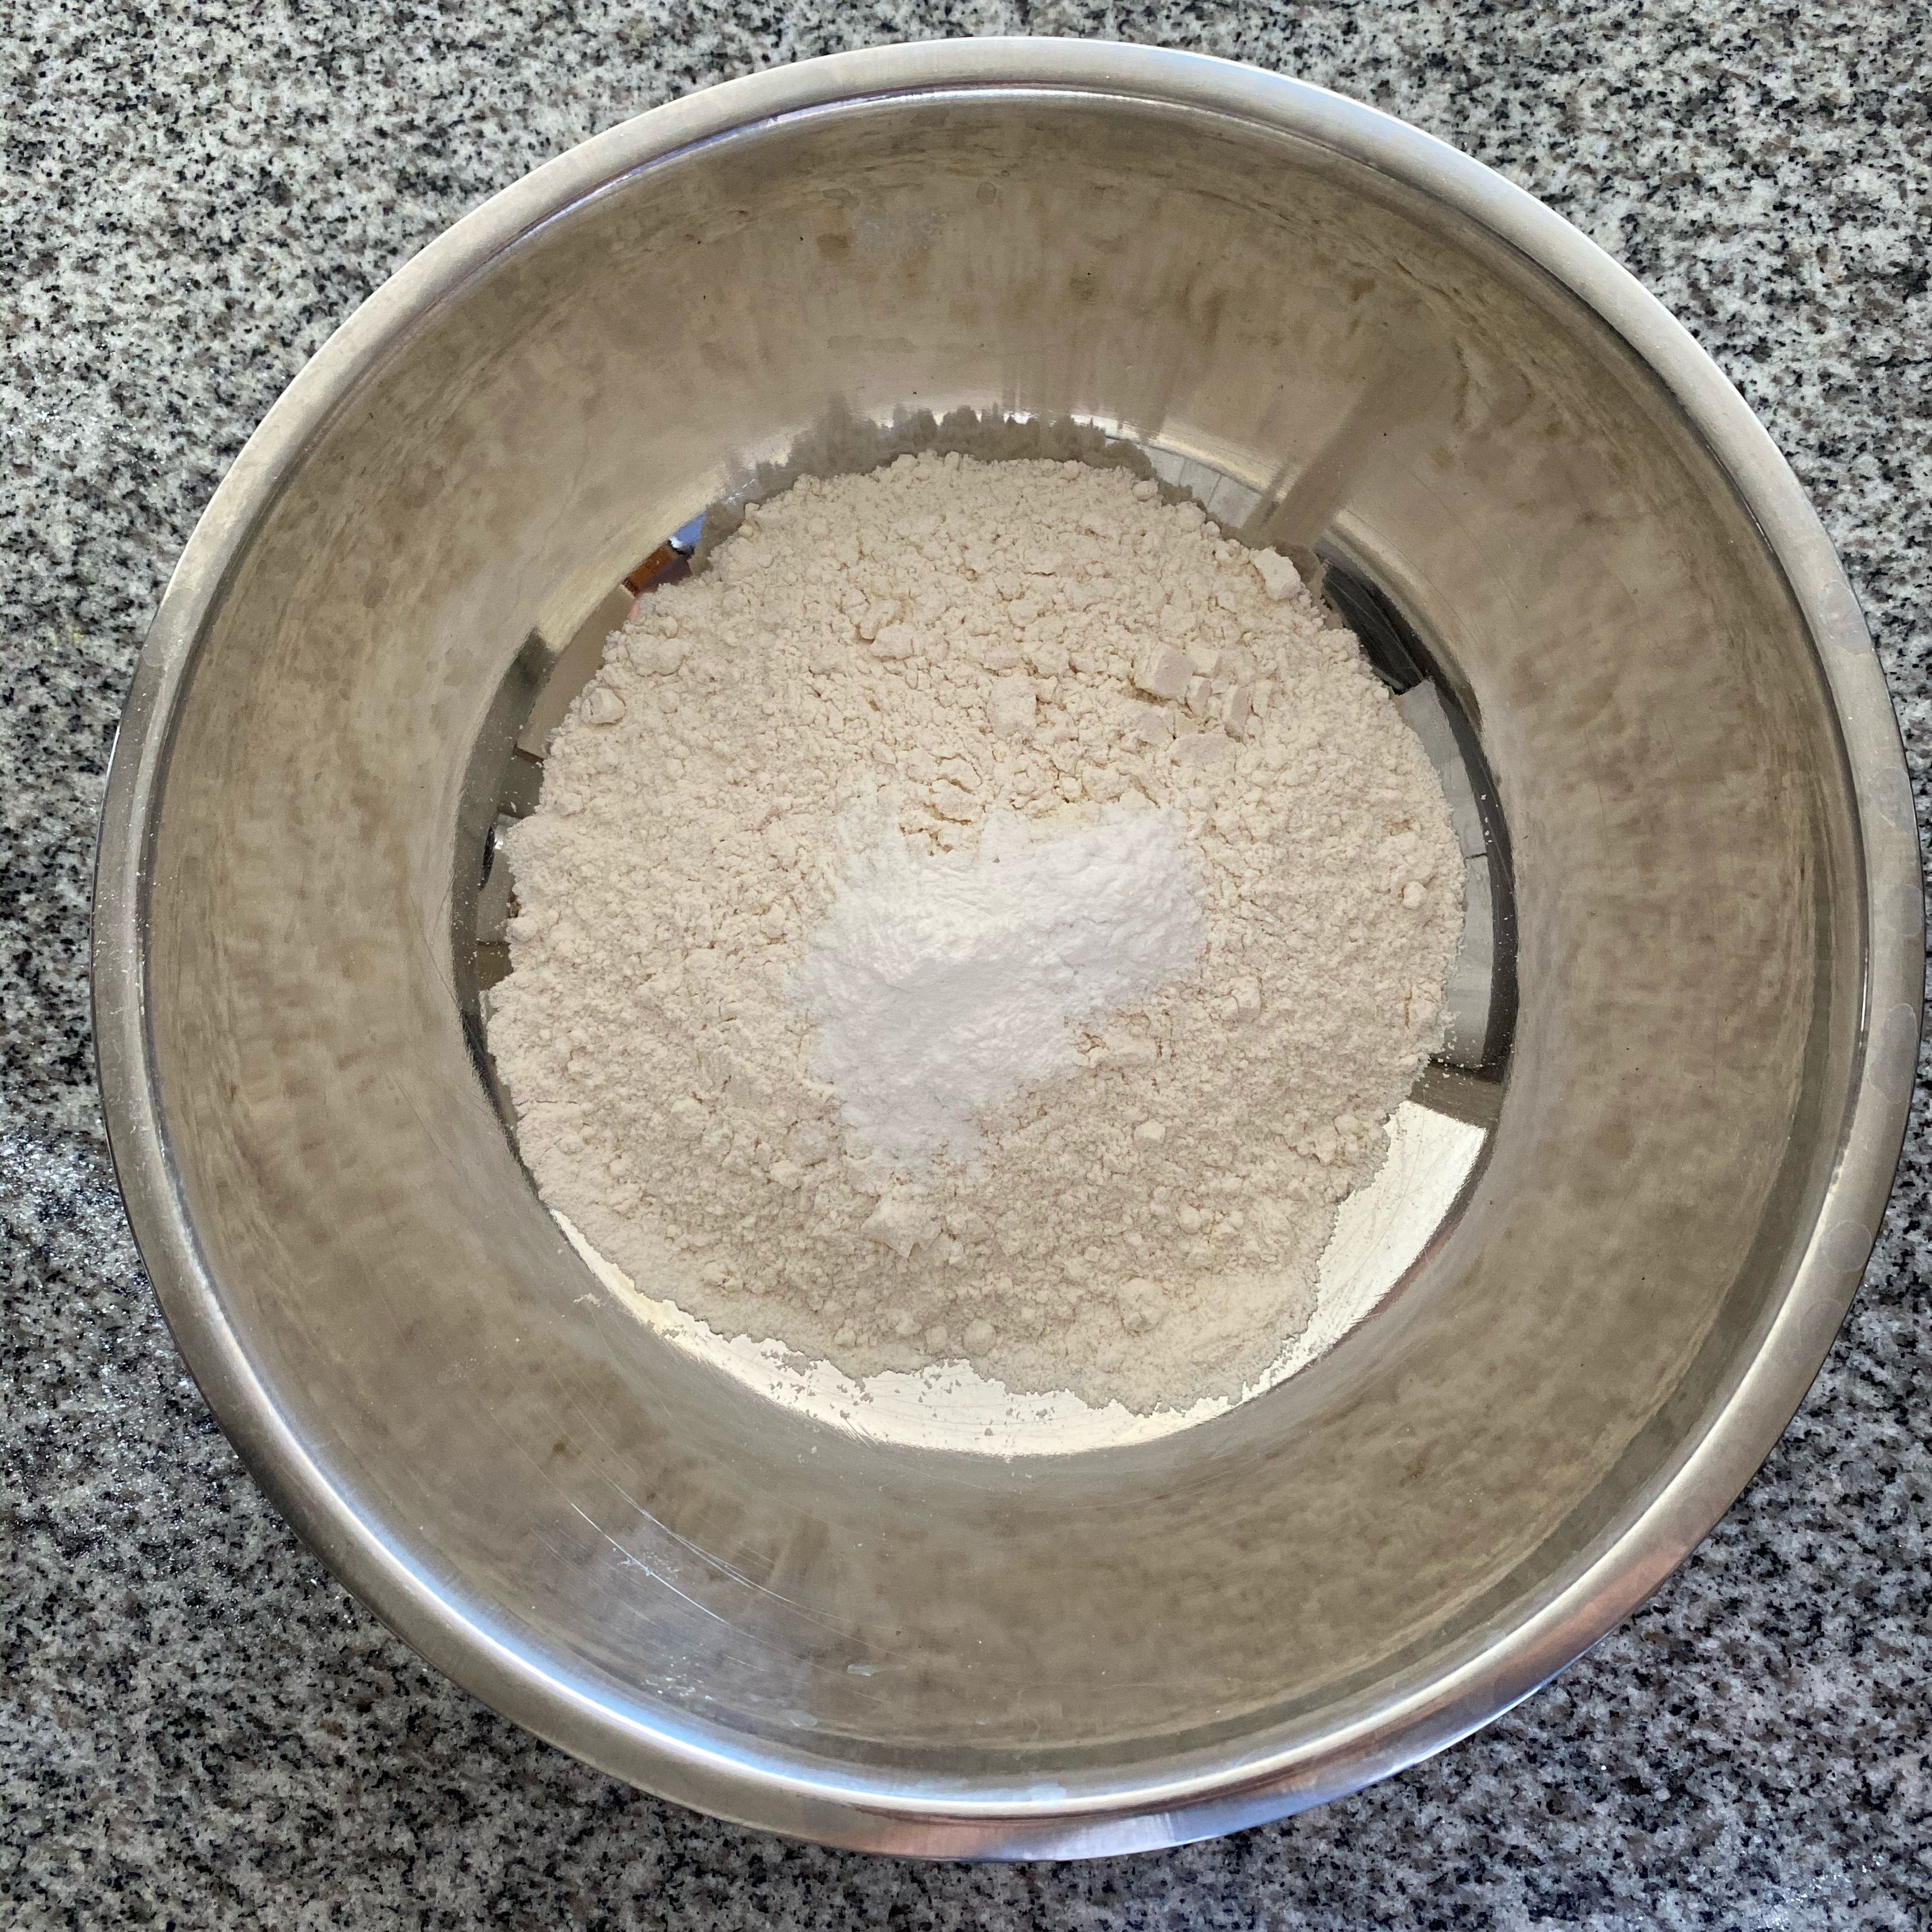 Heat oven to 160/140C fan/gas 3. Grease and line a 2lb tin with baking parchment. Mix the flour, bicarb, baking powder and pinch of salt in a large bowl.